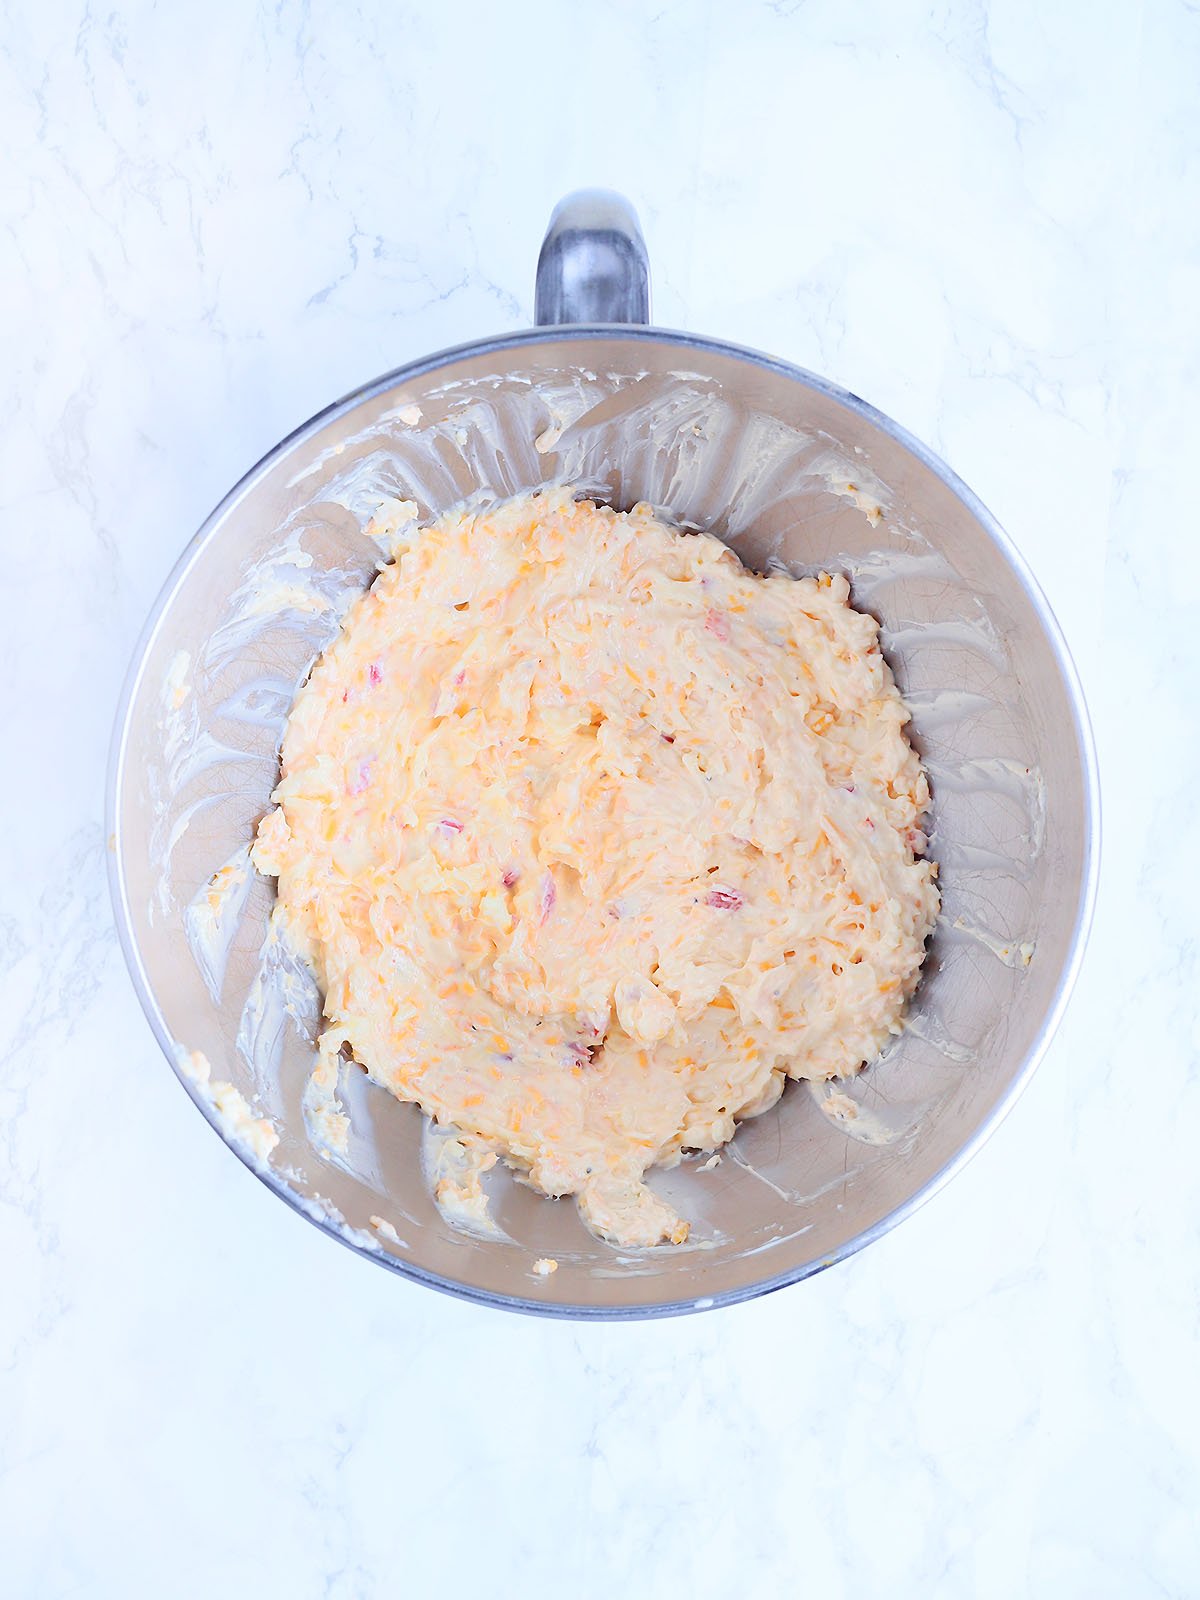 Mixed pimento cheese in a stainless steel mixing bowl.